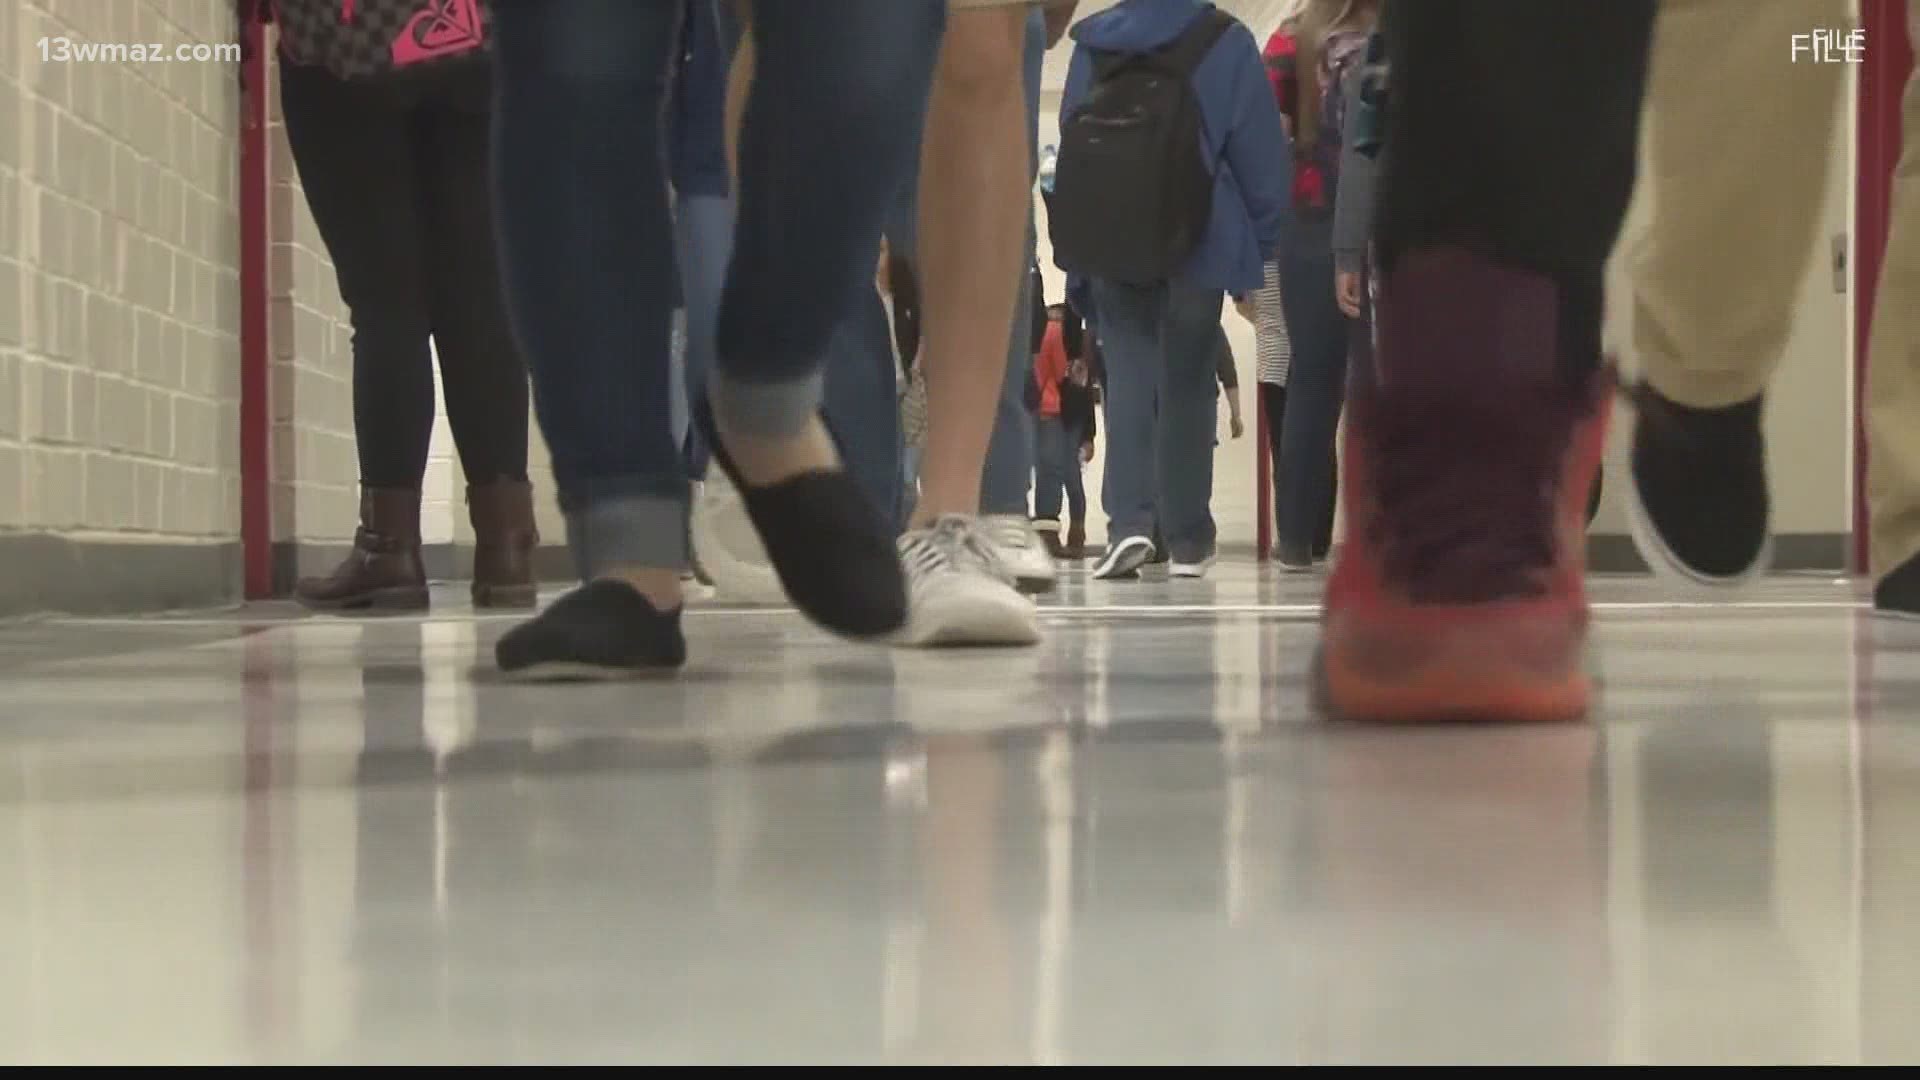 Since the start of the school year, Houston County has seen 77 students test positive for COVID-19 and some parents say they're still worried.